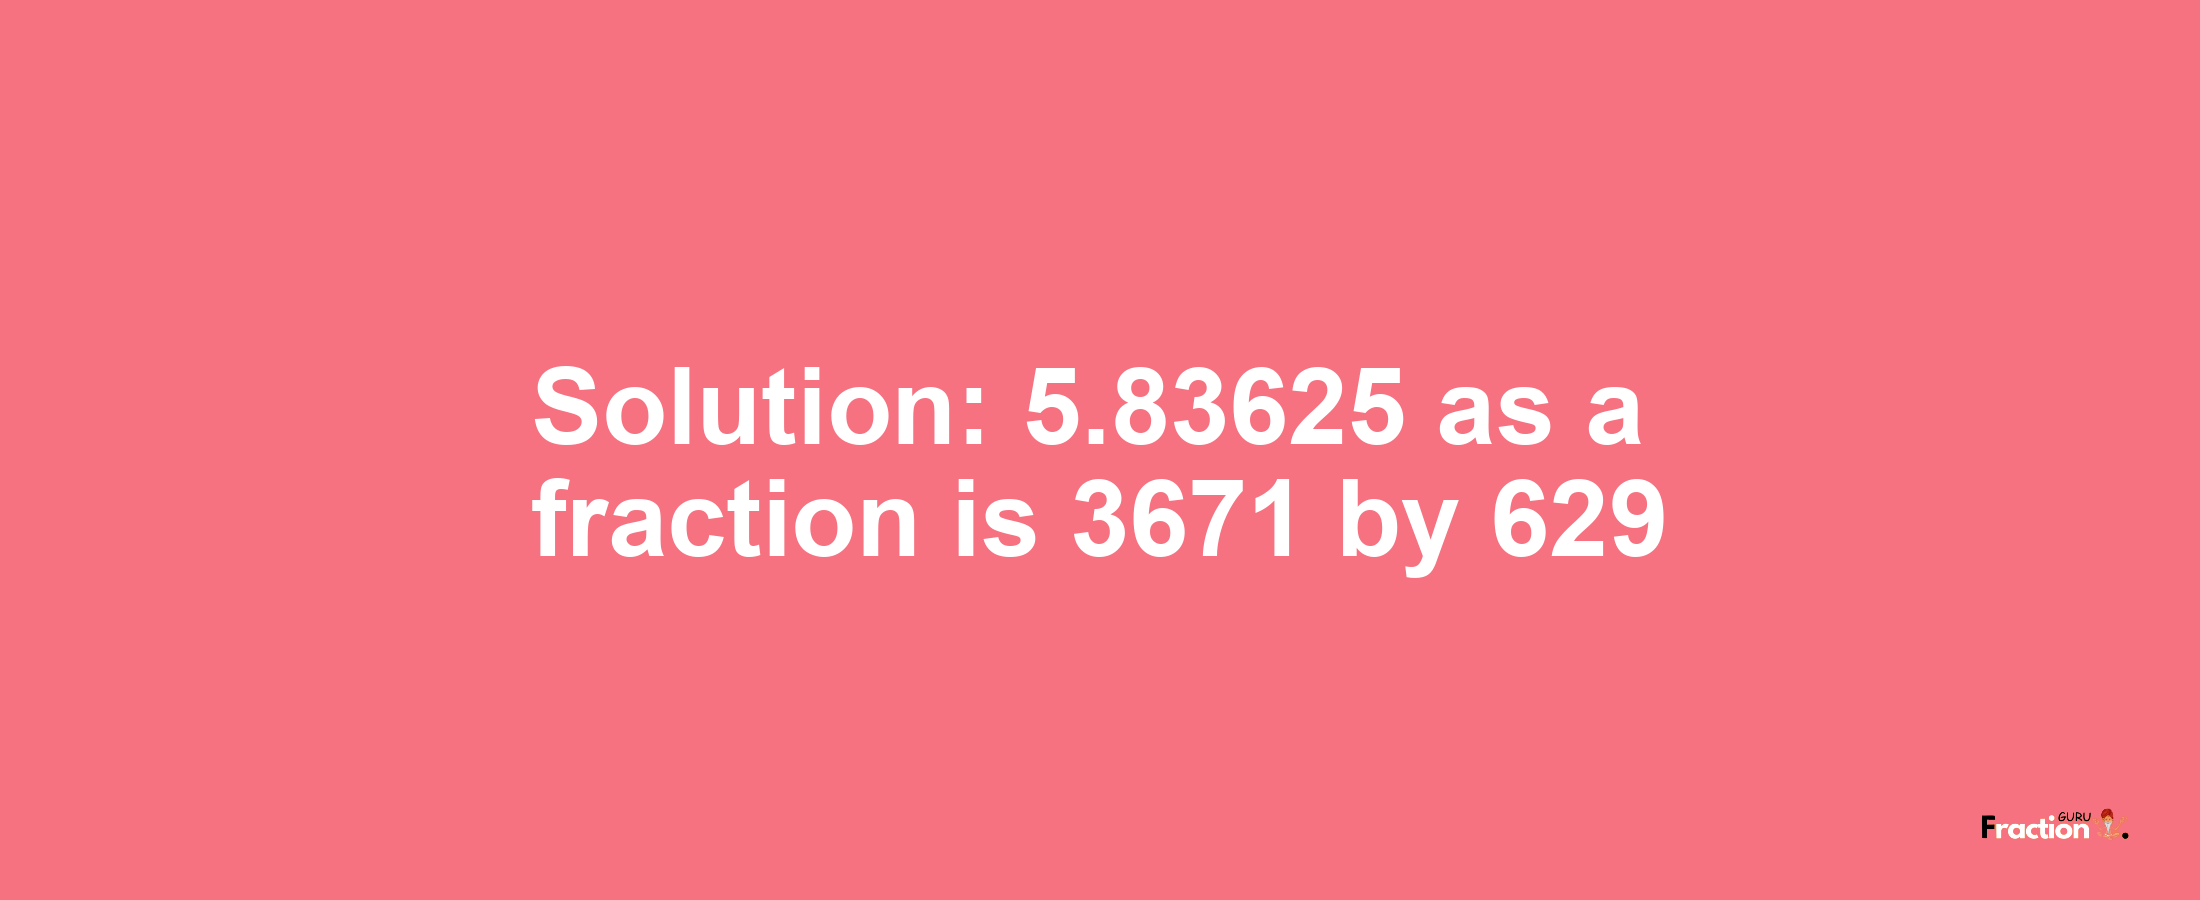 Solution:5.83625 as a fraction is 3671/629